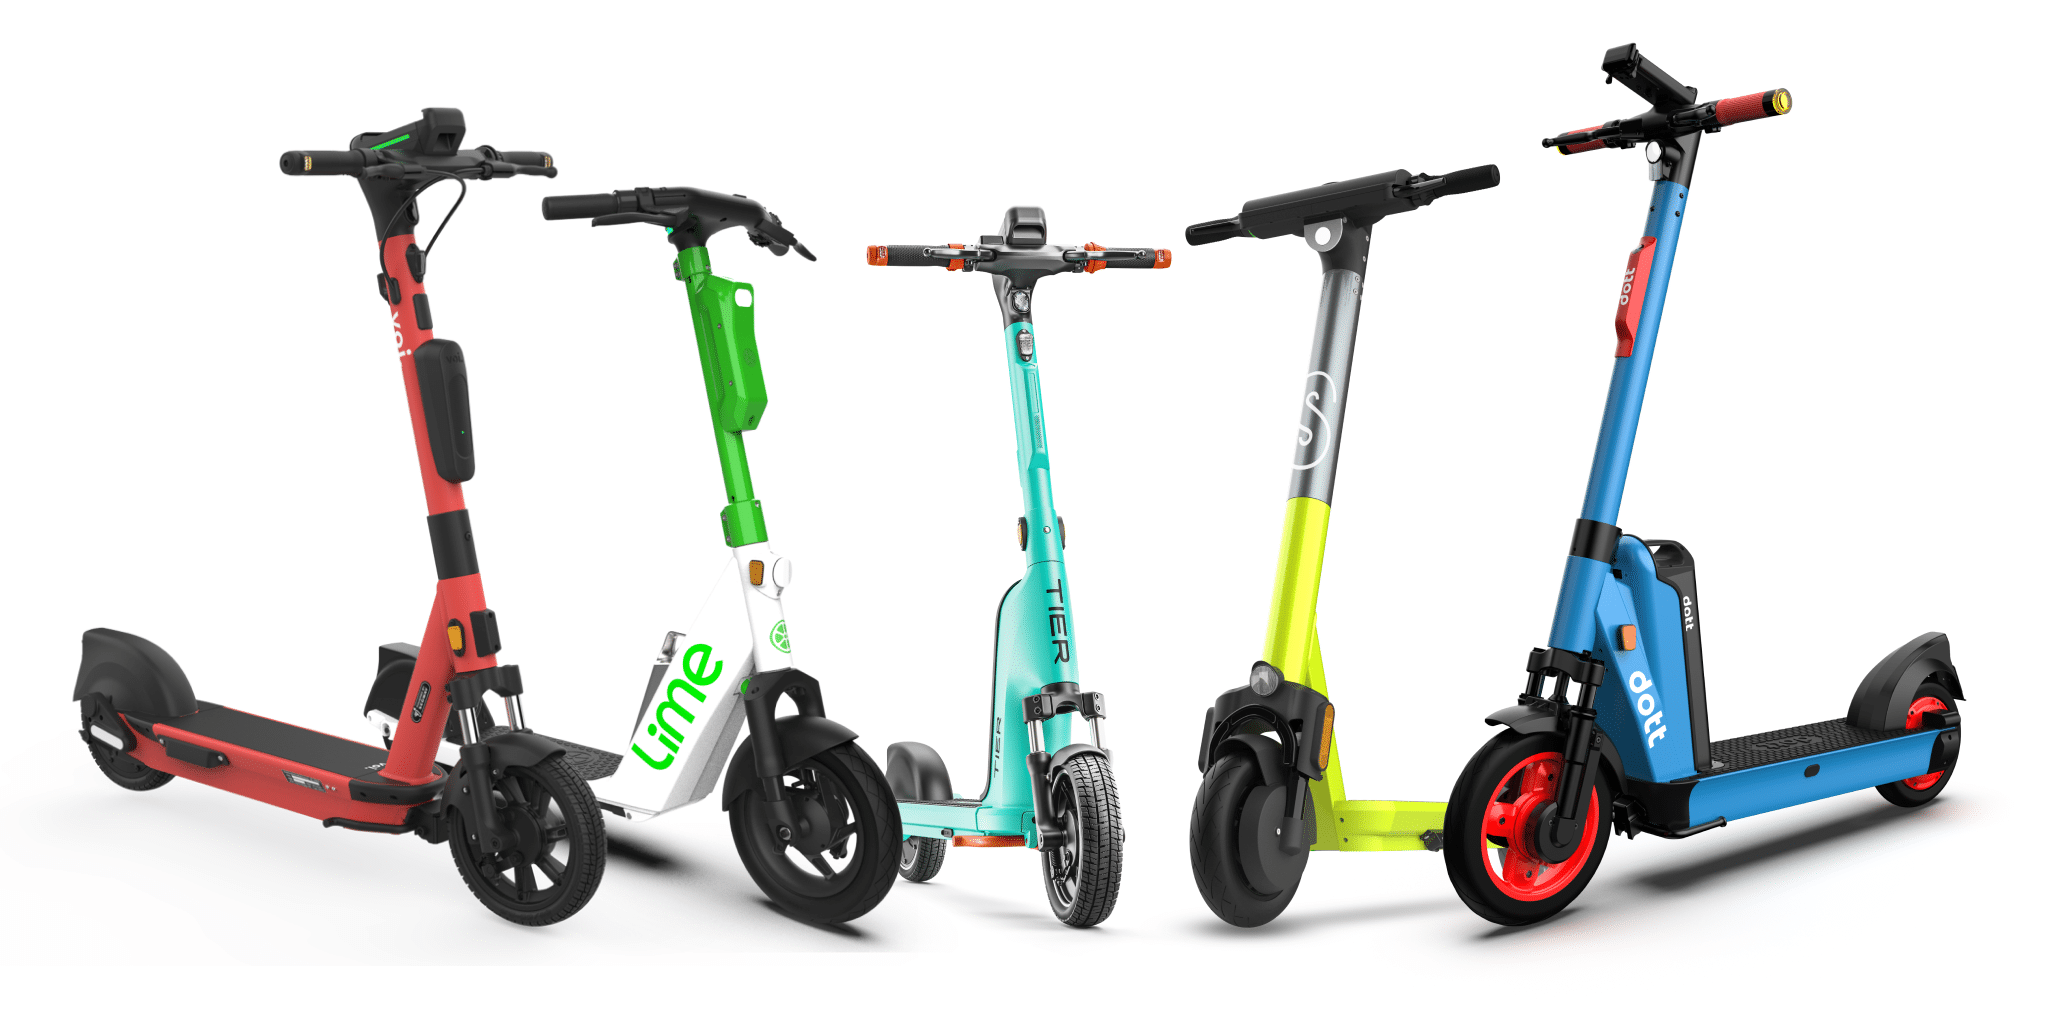 Shared e-bike and e-scooter companies issue first-ever industry recommendations European cities - Dott